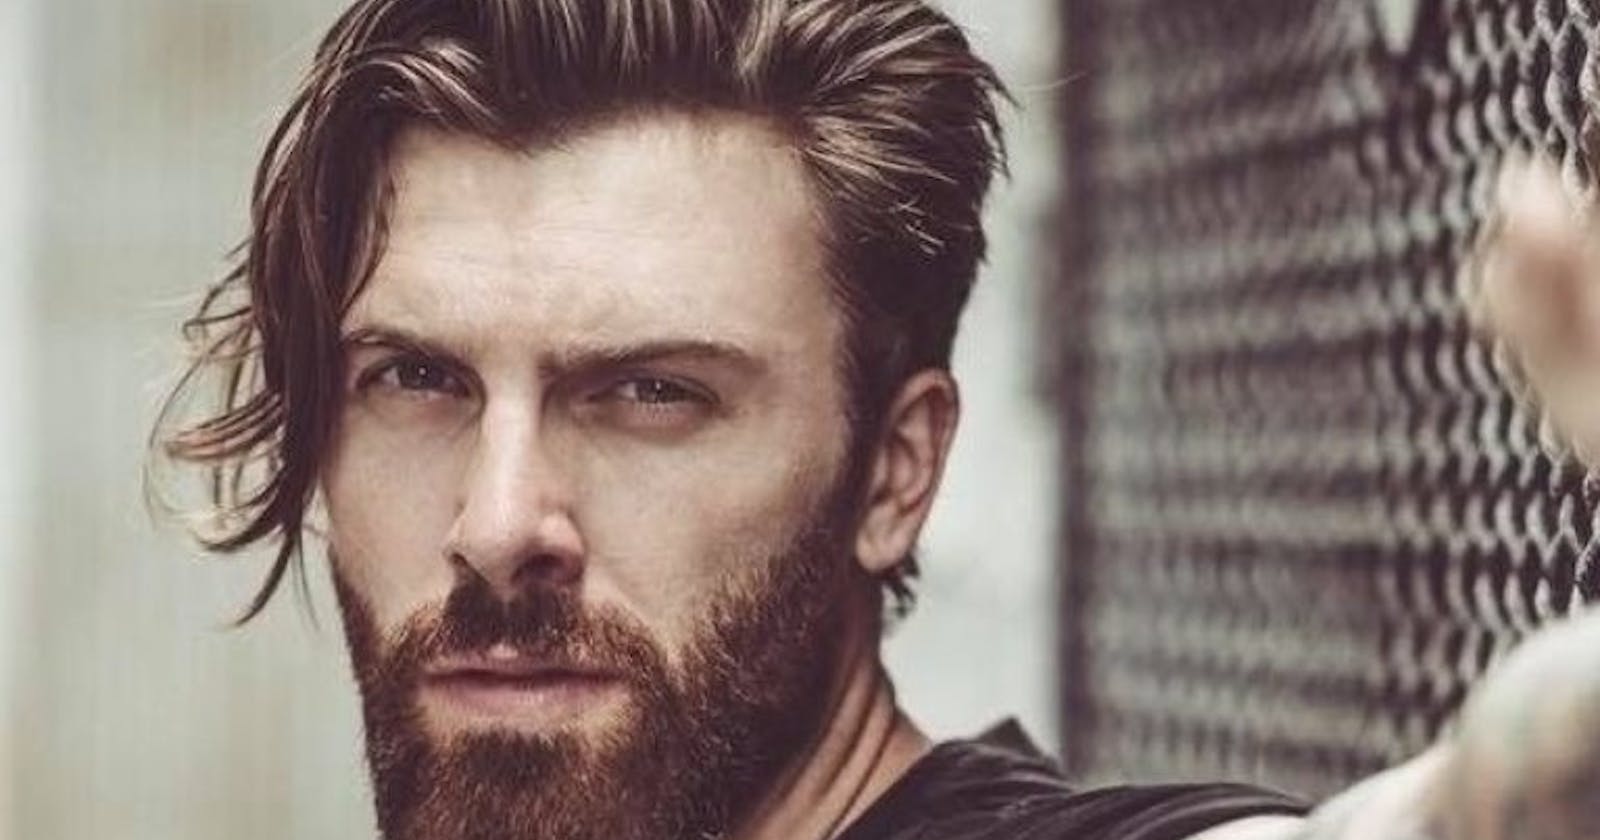 Beard Styles that Suit You: Choosing the Right Look for Your Face Shape